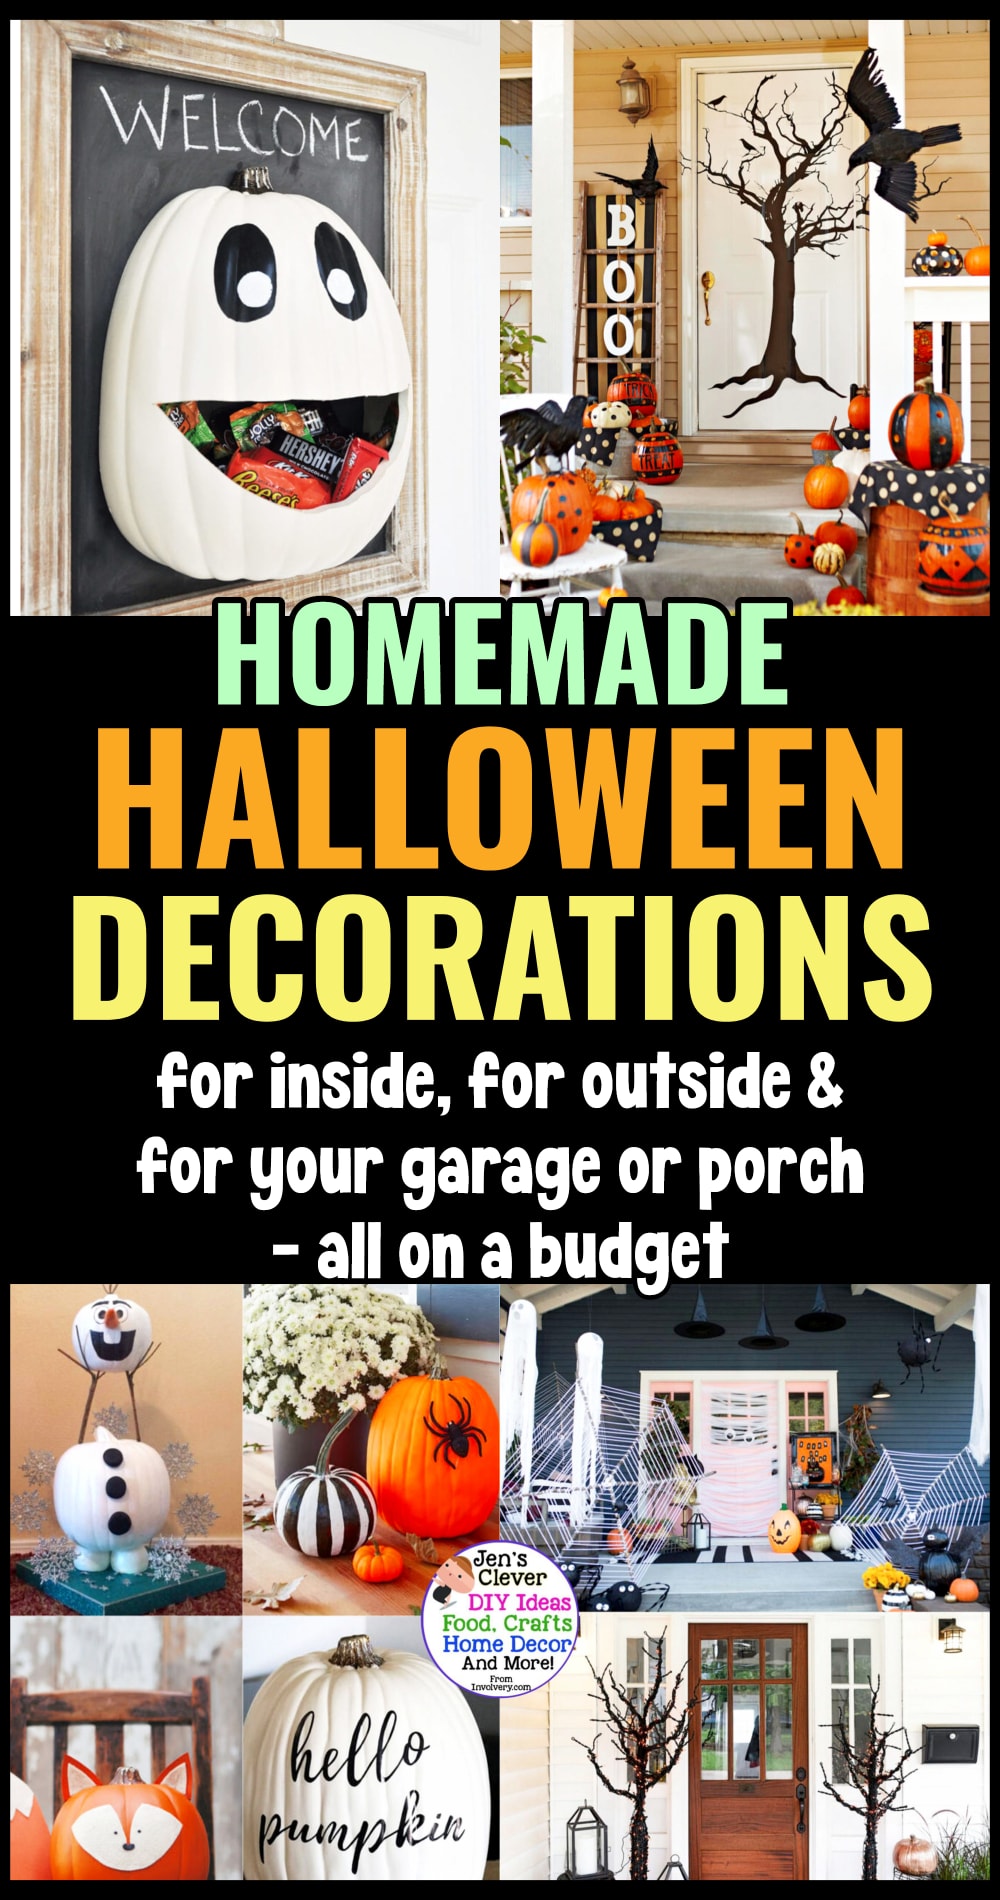 Homemade Halloween Decorations and Fall Halloween Decor To Decorate Inside Outside Front Porch Door Veranda Garage Yard Displays or a Spooky Halloween Party - decorating for Halloween on a budget, big list of cute creepy & cheap homemade Halloween decorations - fun & easy DIY project tutorial videos for Halloween. Halloween DIY Outdoor Casa Halloween - Halloween wood crafts, banners, Dollar Tree store craft projects, no carve pumpkin ideas, holidays Halloween pins, Dollar Store Halloween